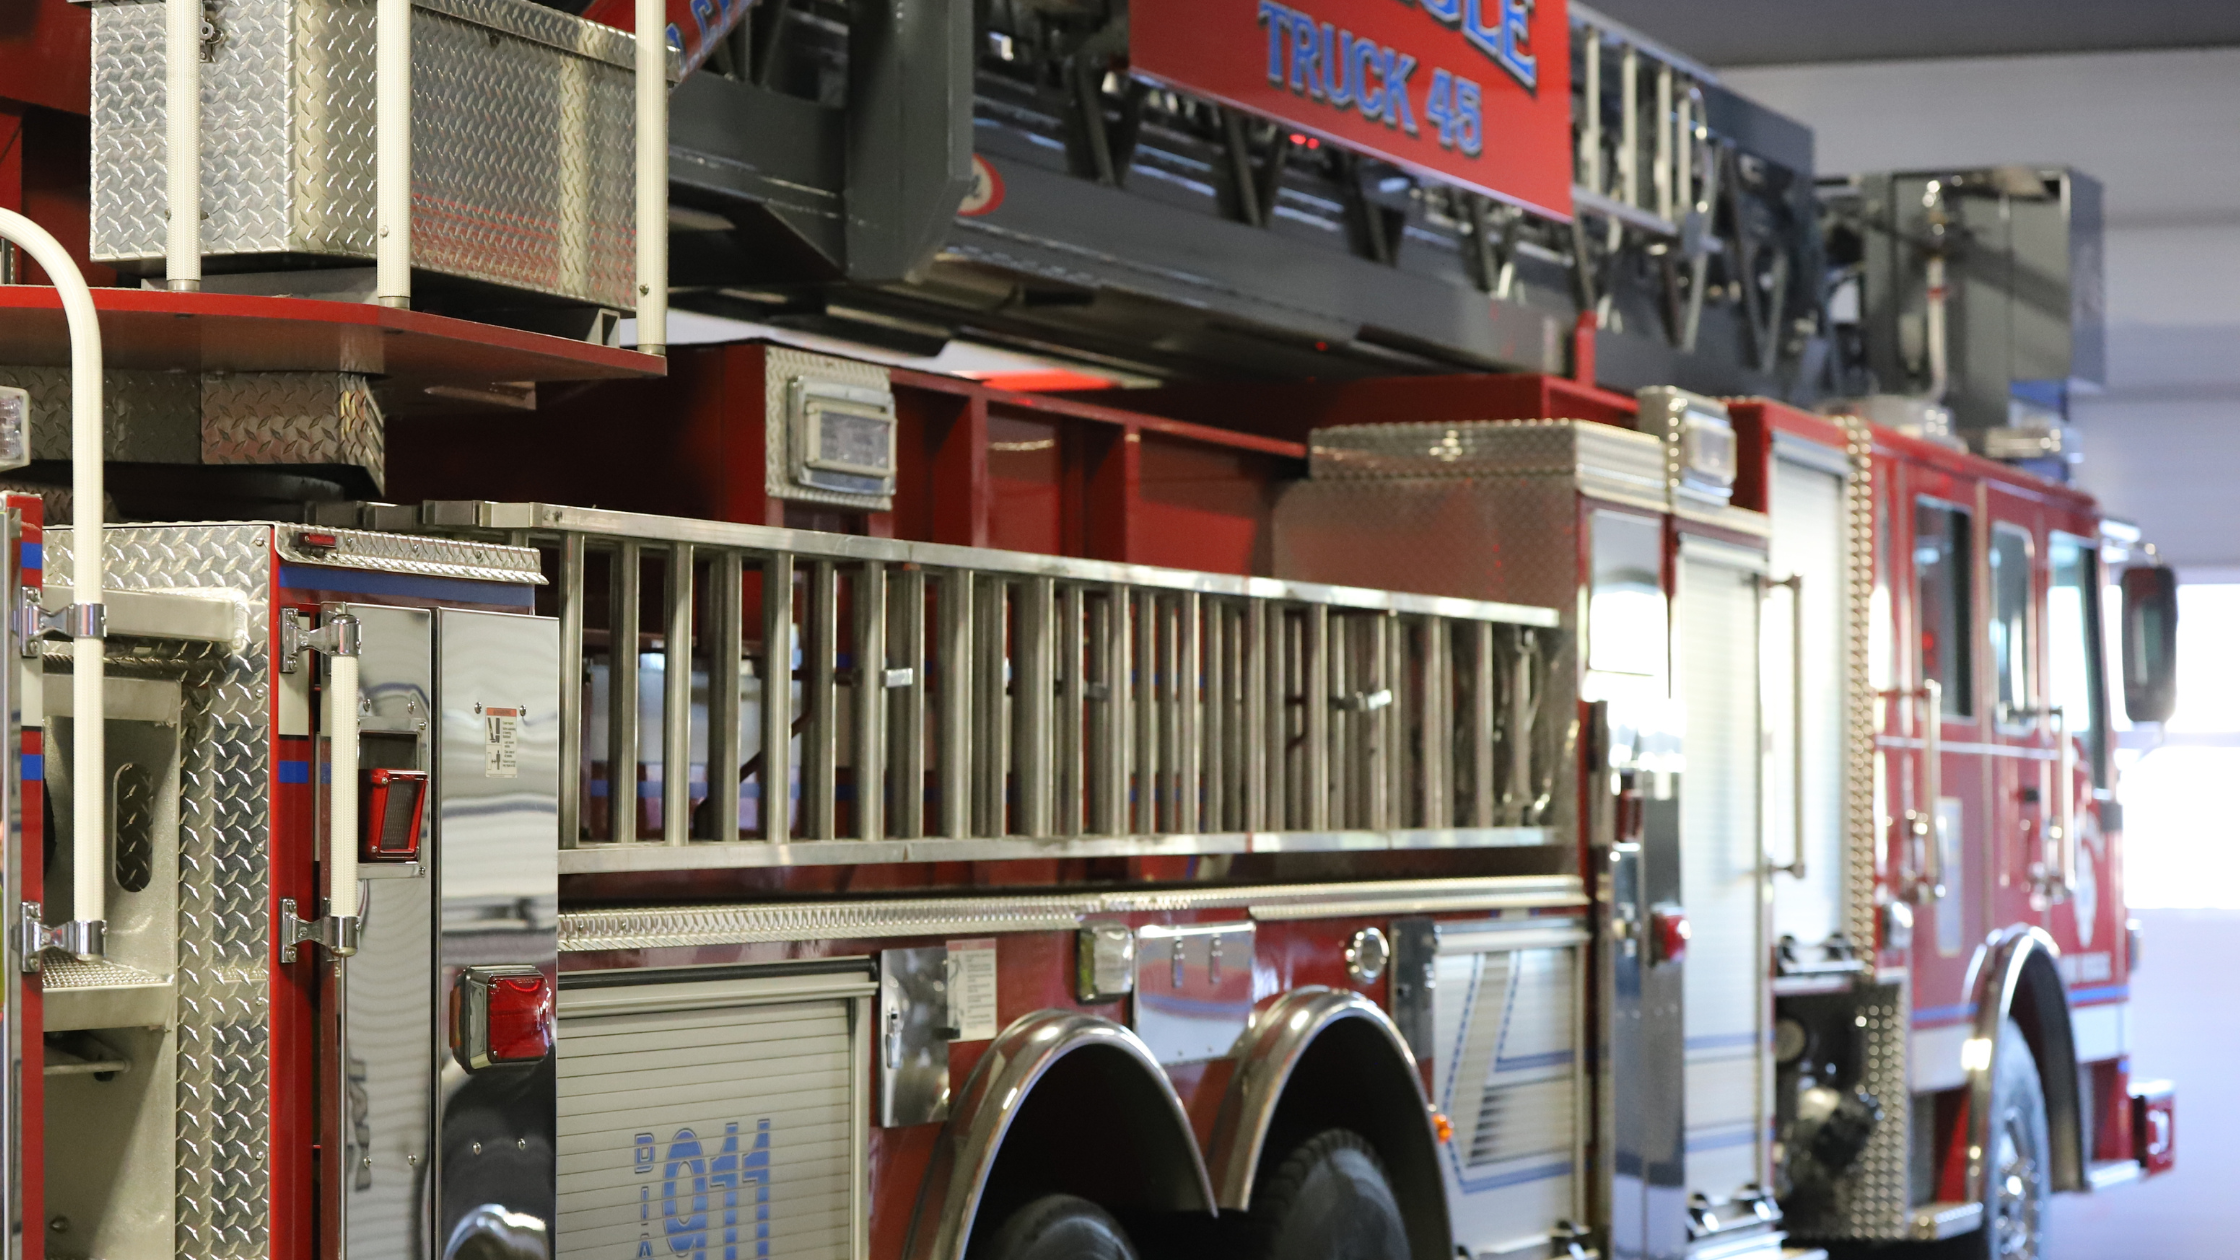  Learn more about fire truck insurance, including what agreed value means.